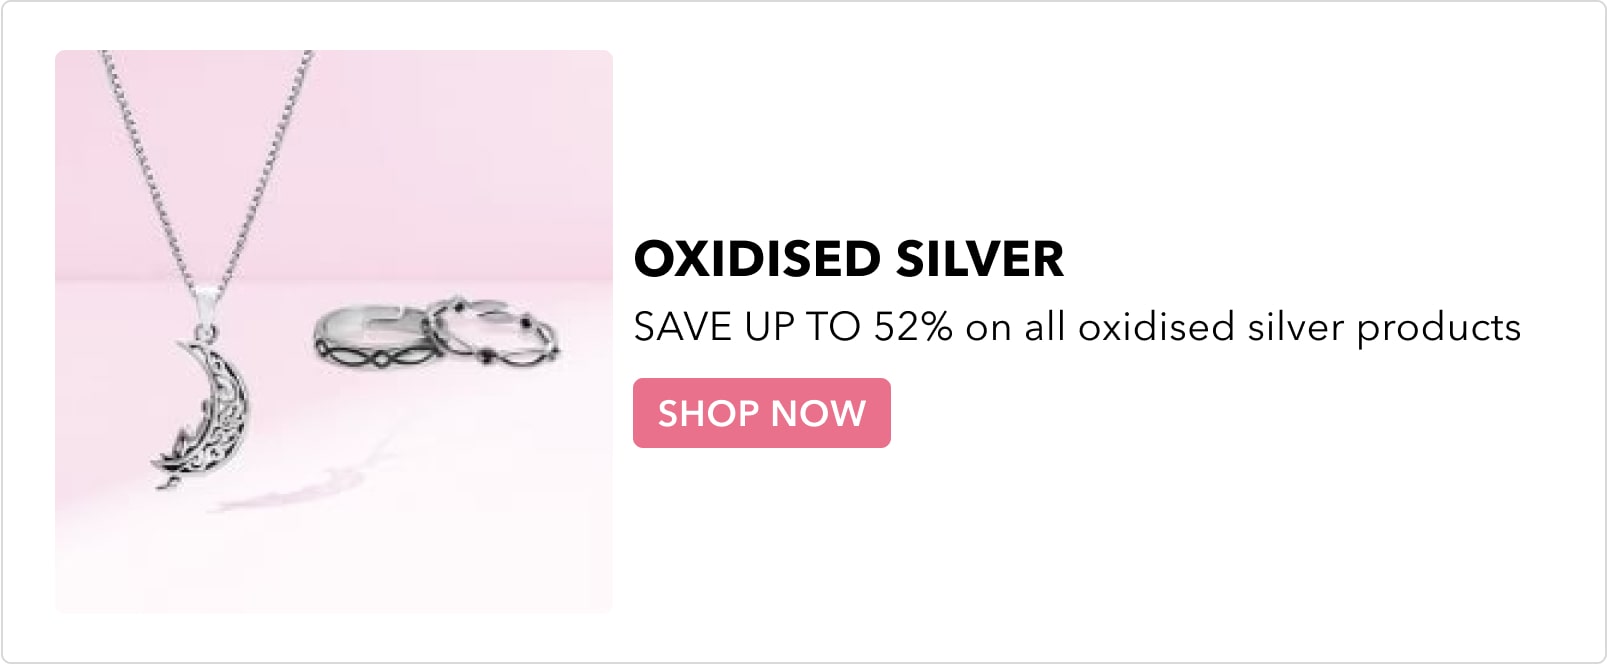 SAVE UP TO 52% on all oxidised silver products